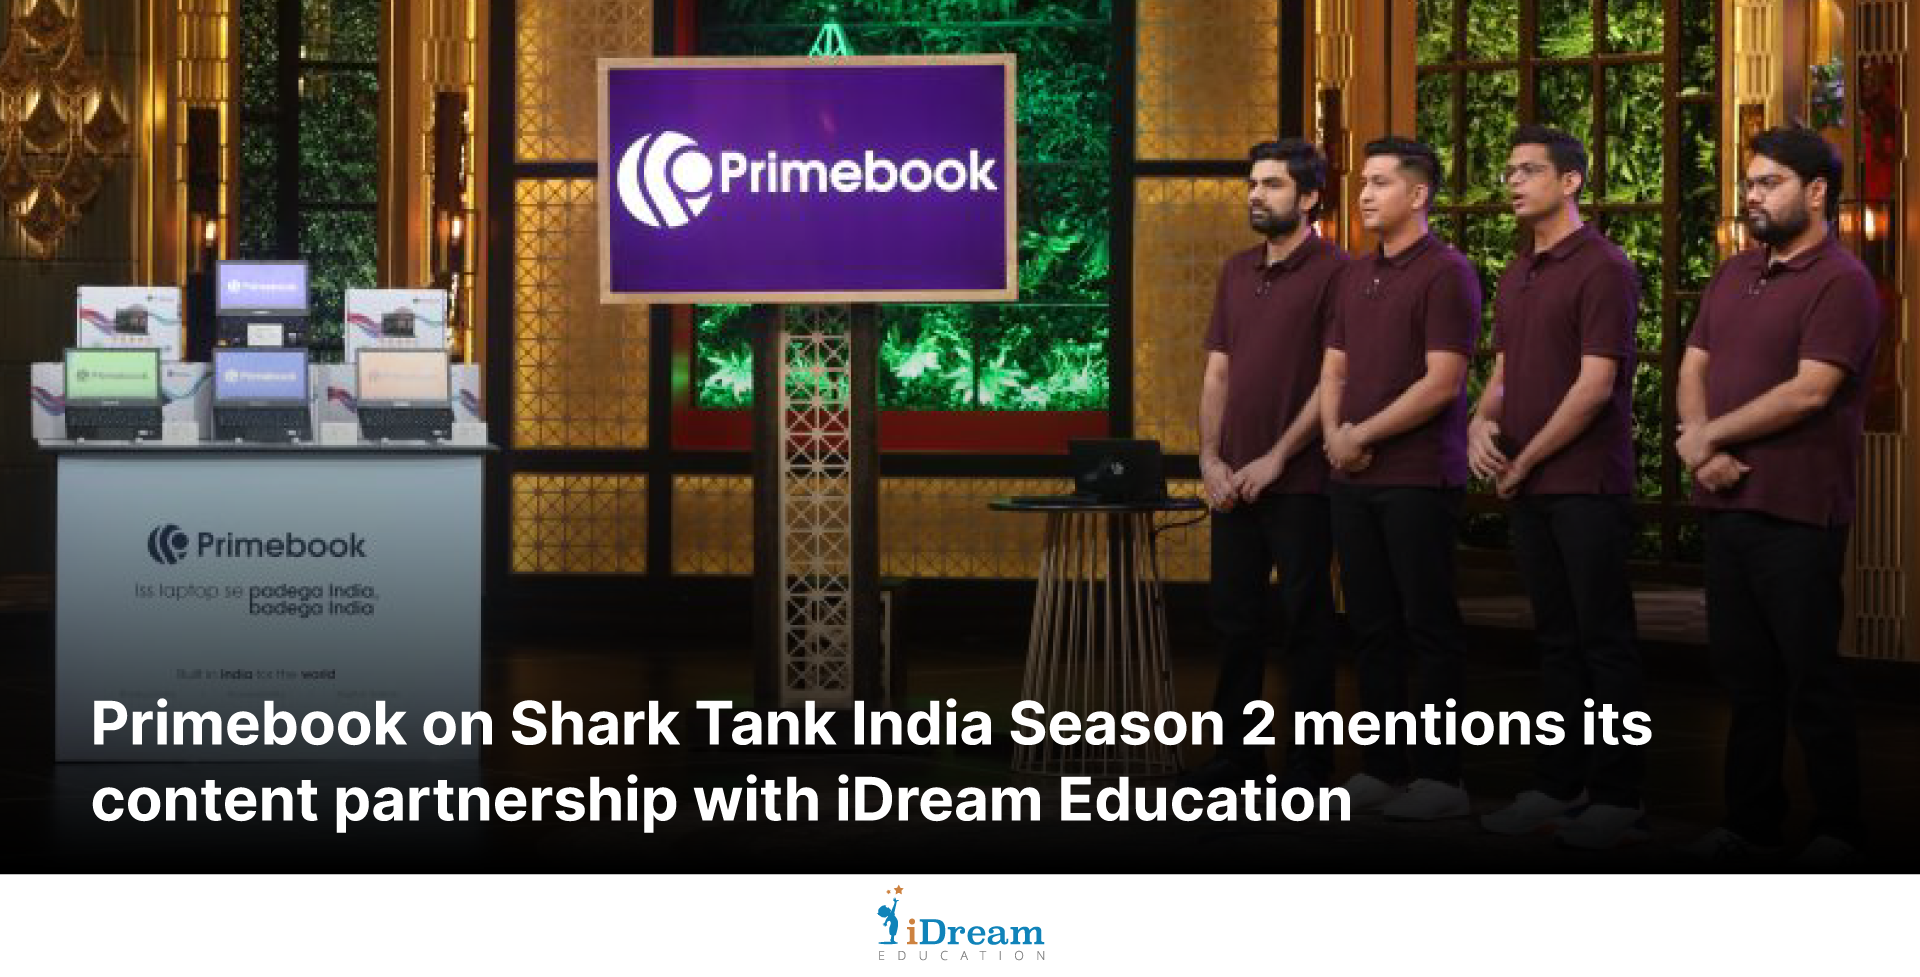 Primebook-Founders-Calling-out-iDream-Education's-iPrep-app-as-Content-Partner-for-their-Android-based-laptop-on-Shark-Tank